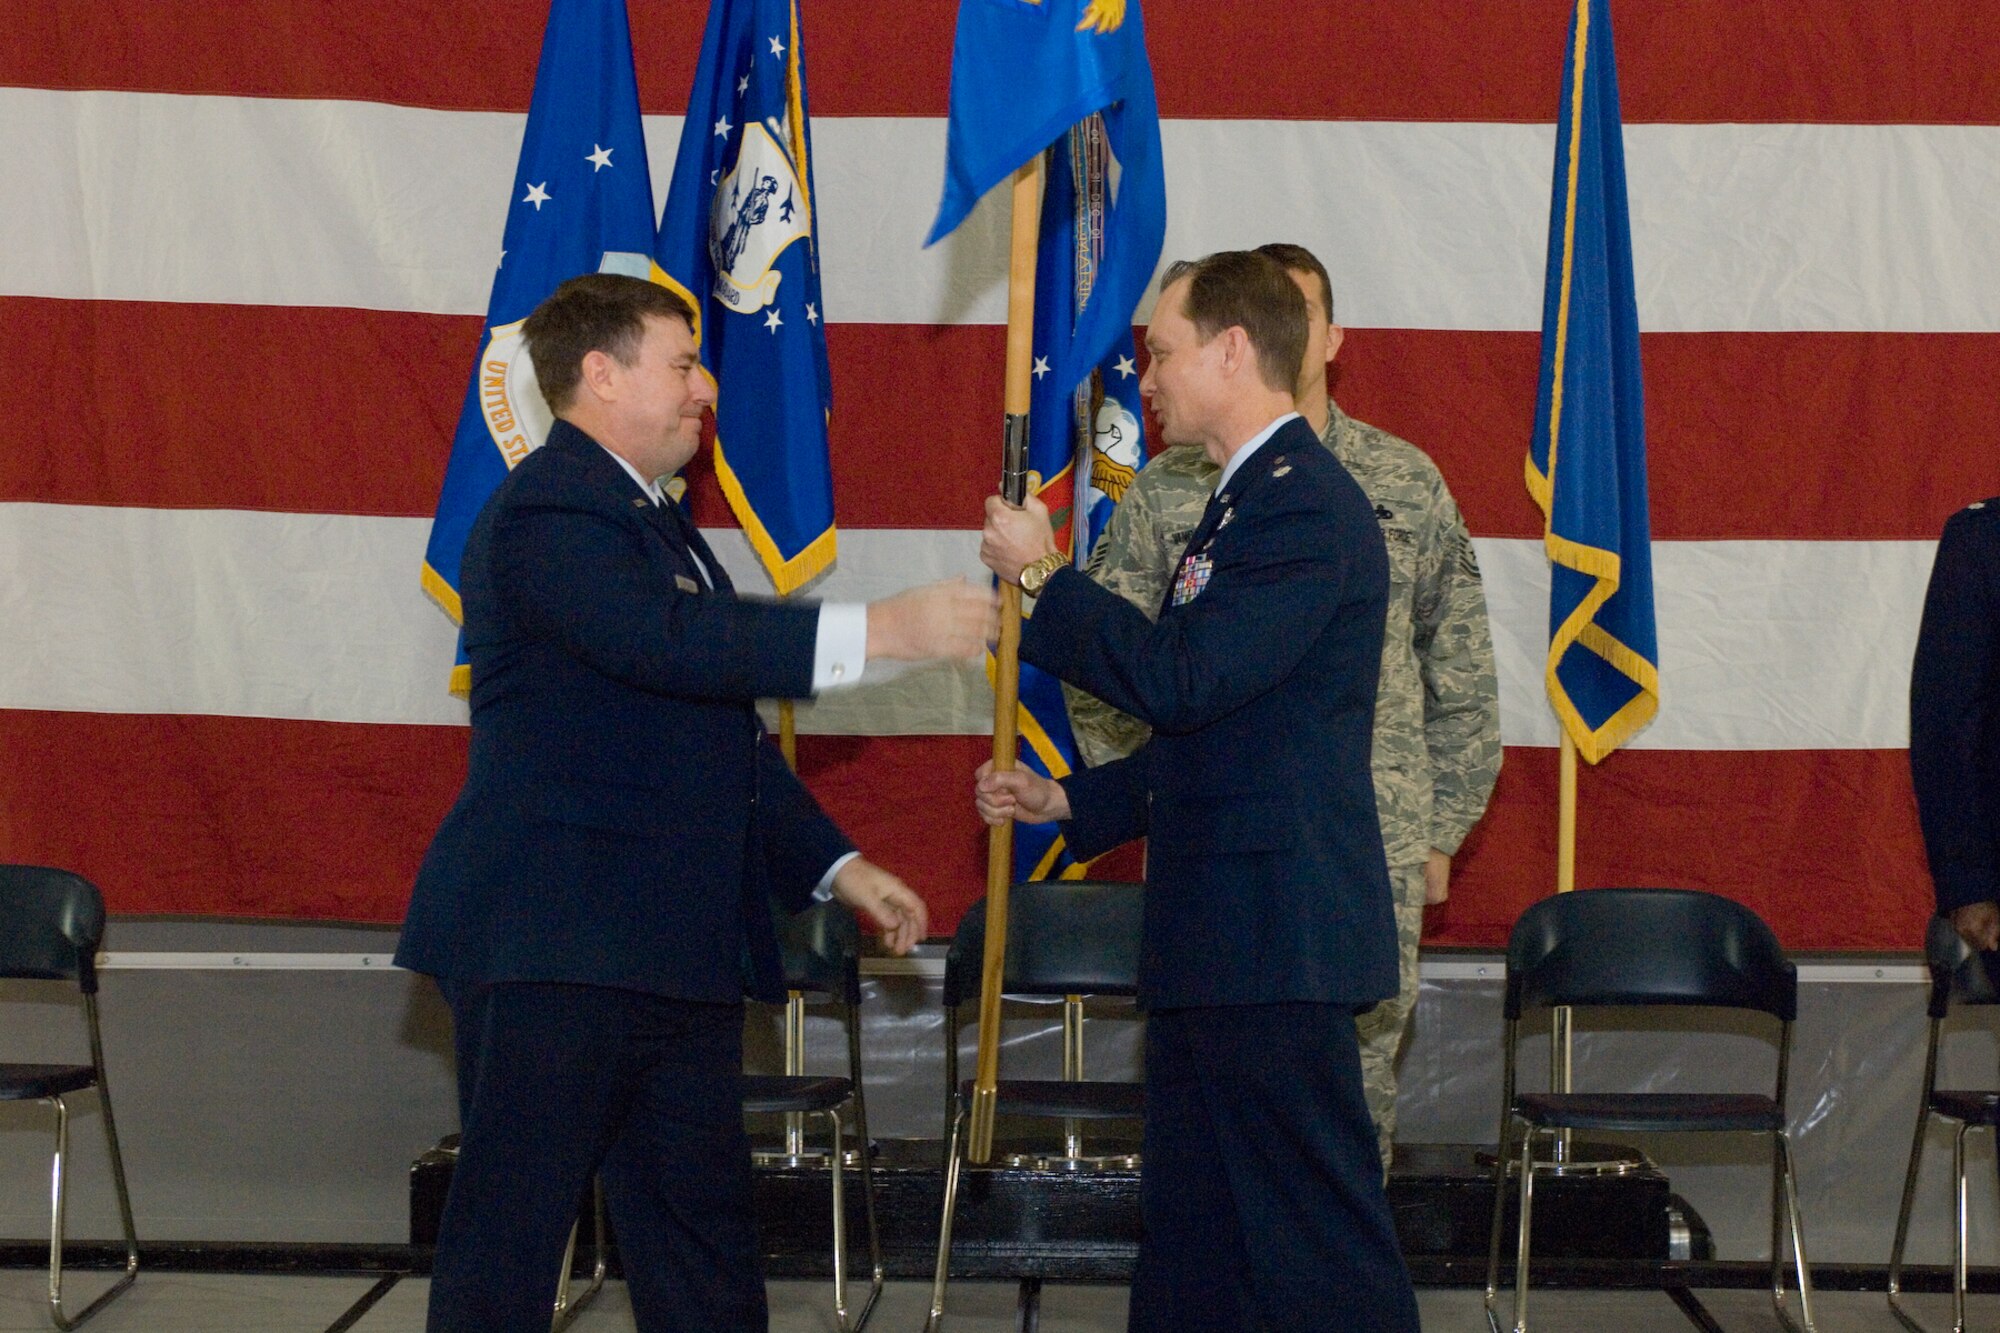 Brig. Gen. Michael Peplinski hands the 127th Maintenance Group Flag to Lt. Col. Gregory S. Holzhei during an April 4, 2009, assumption of command ceremony at Selfridge Air National Guard Base, Mich. Peplinski is the commander of the 127th Wing. Holzhei had recently been serving as the deputy commander for maintenance in the 127th Air Refueling Group, which is also at Selfridge. (U.S. Air Force photo by SrA. Jeremy Brownfield)